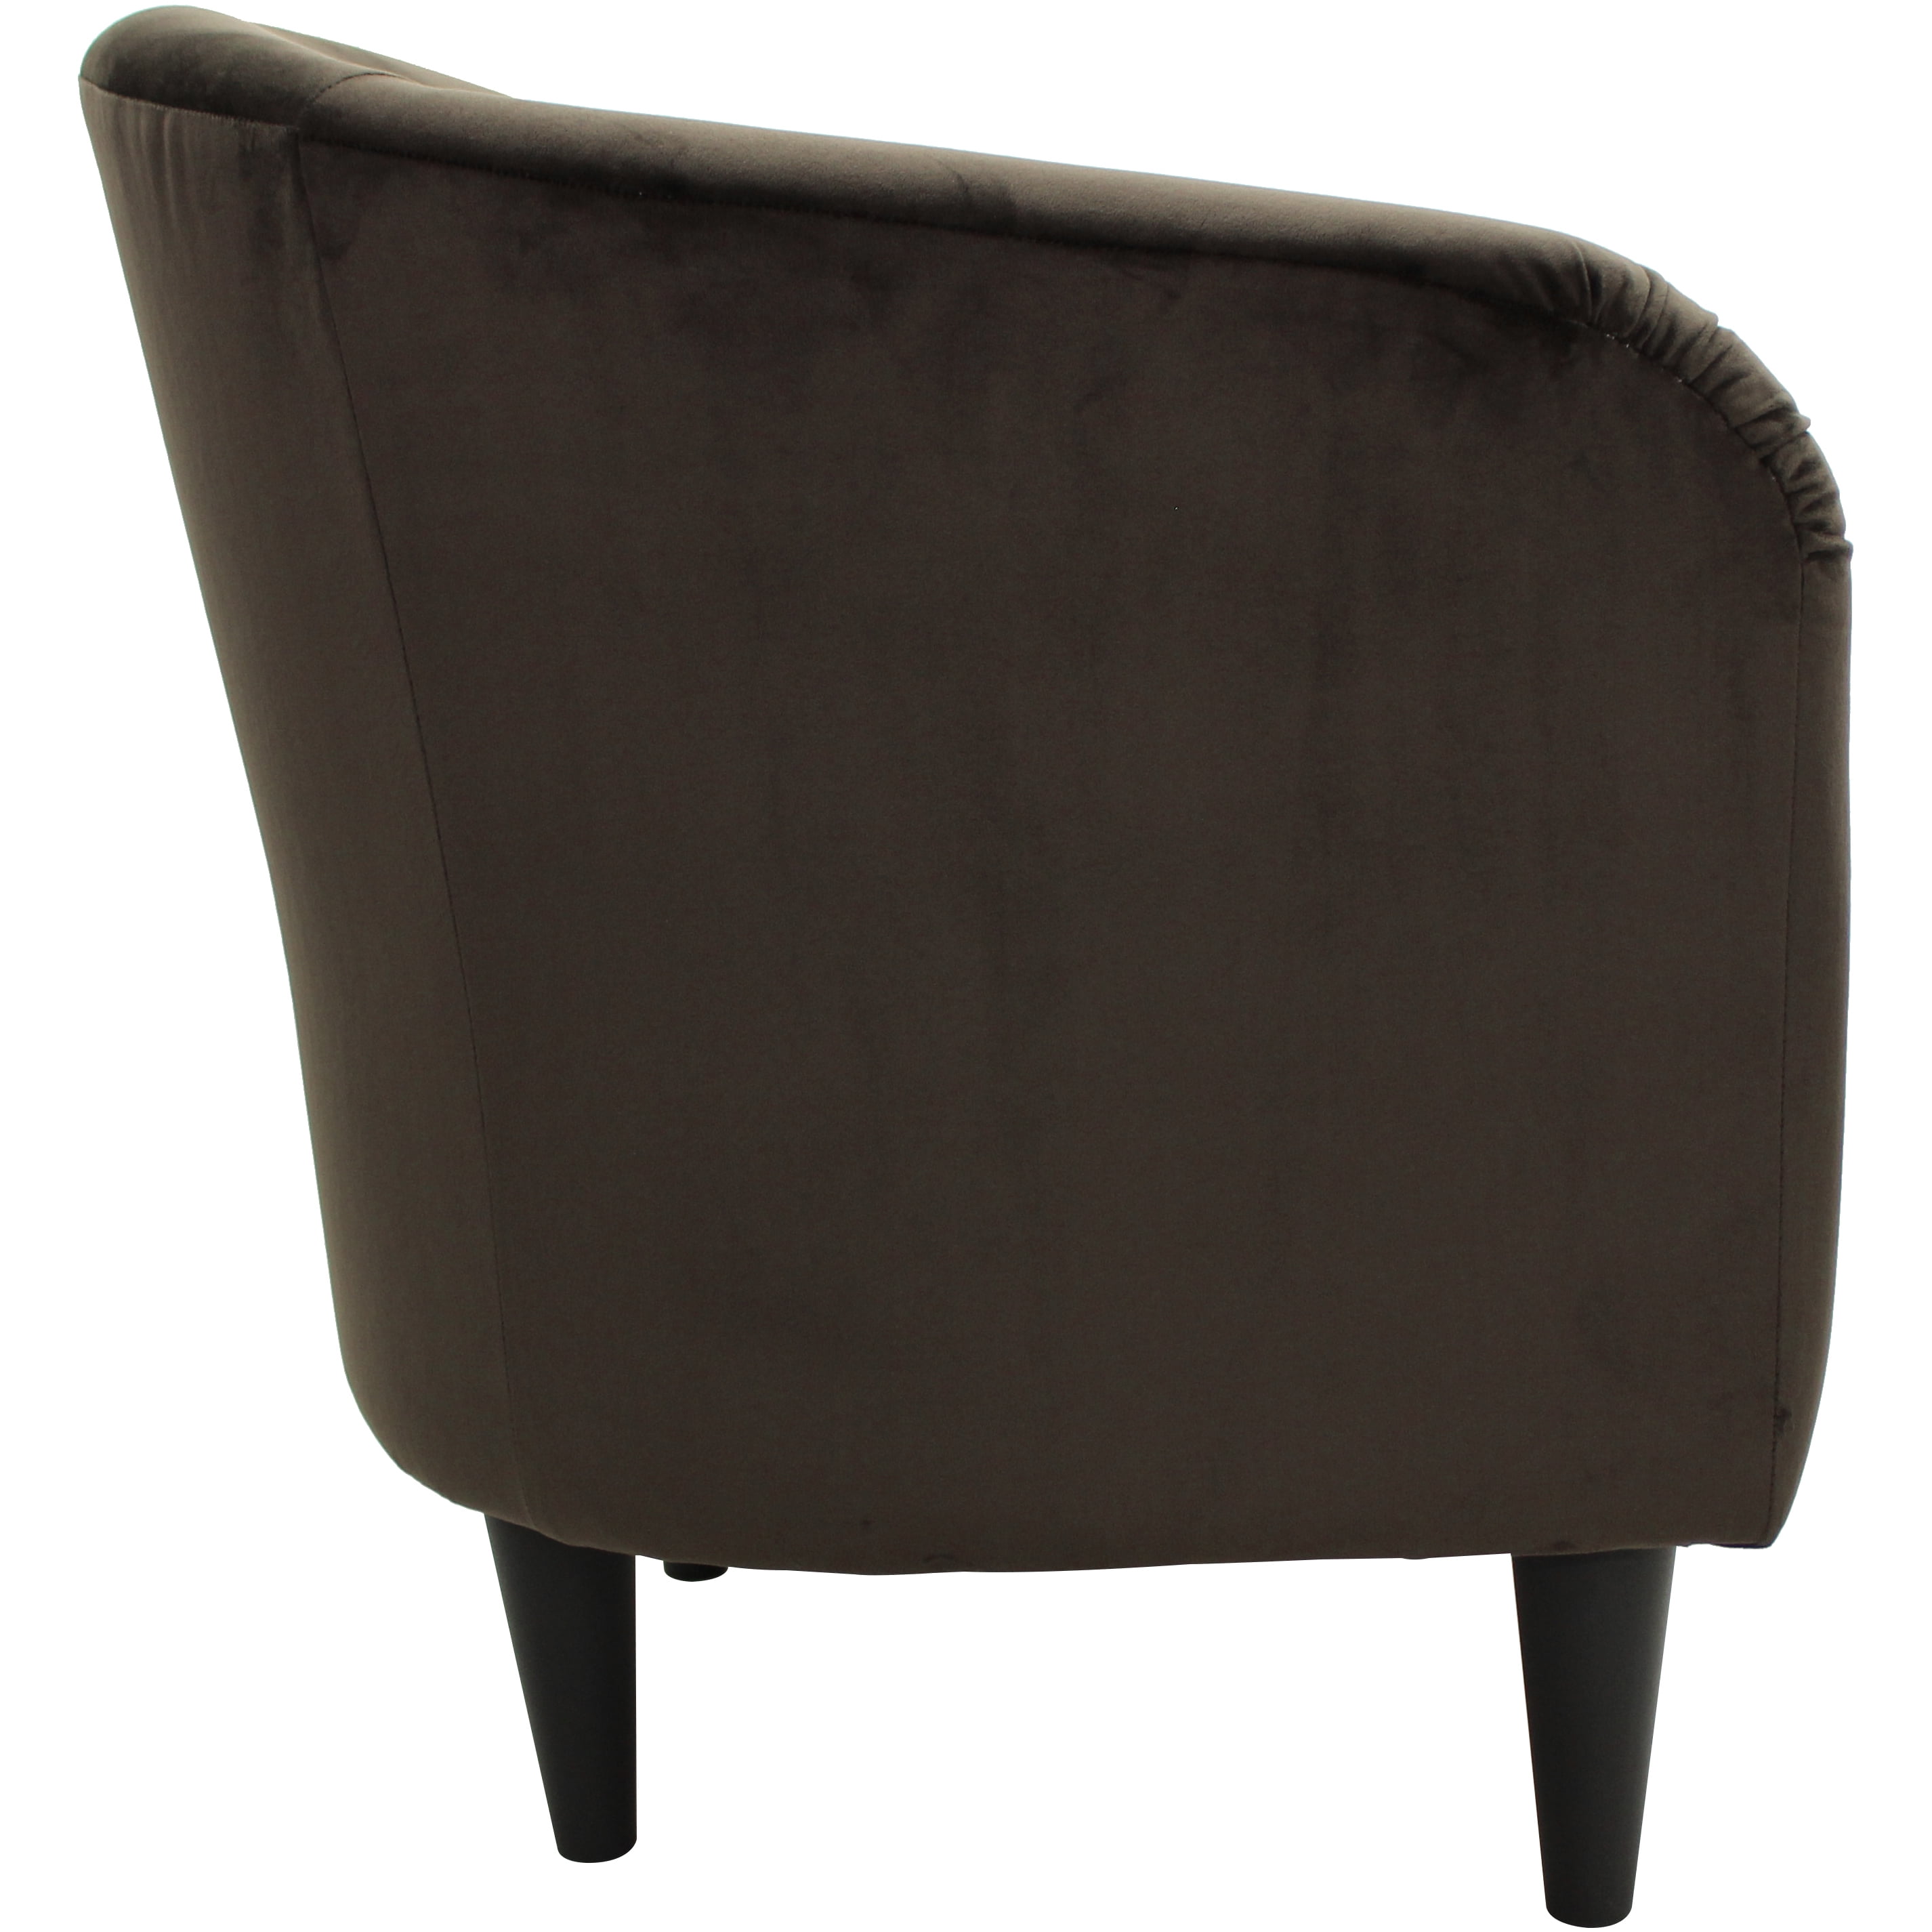 Mainstays Microfiber Tub Accent Chair, Chocolate Brown - 2